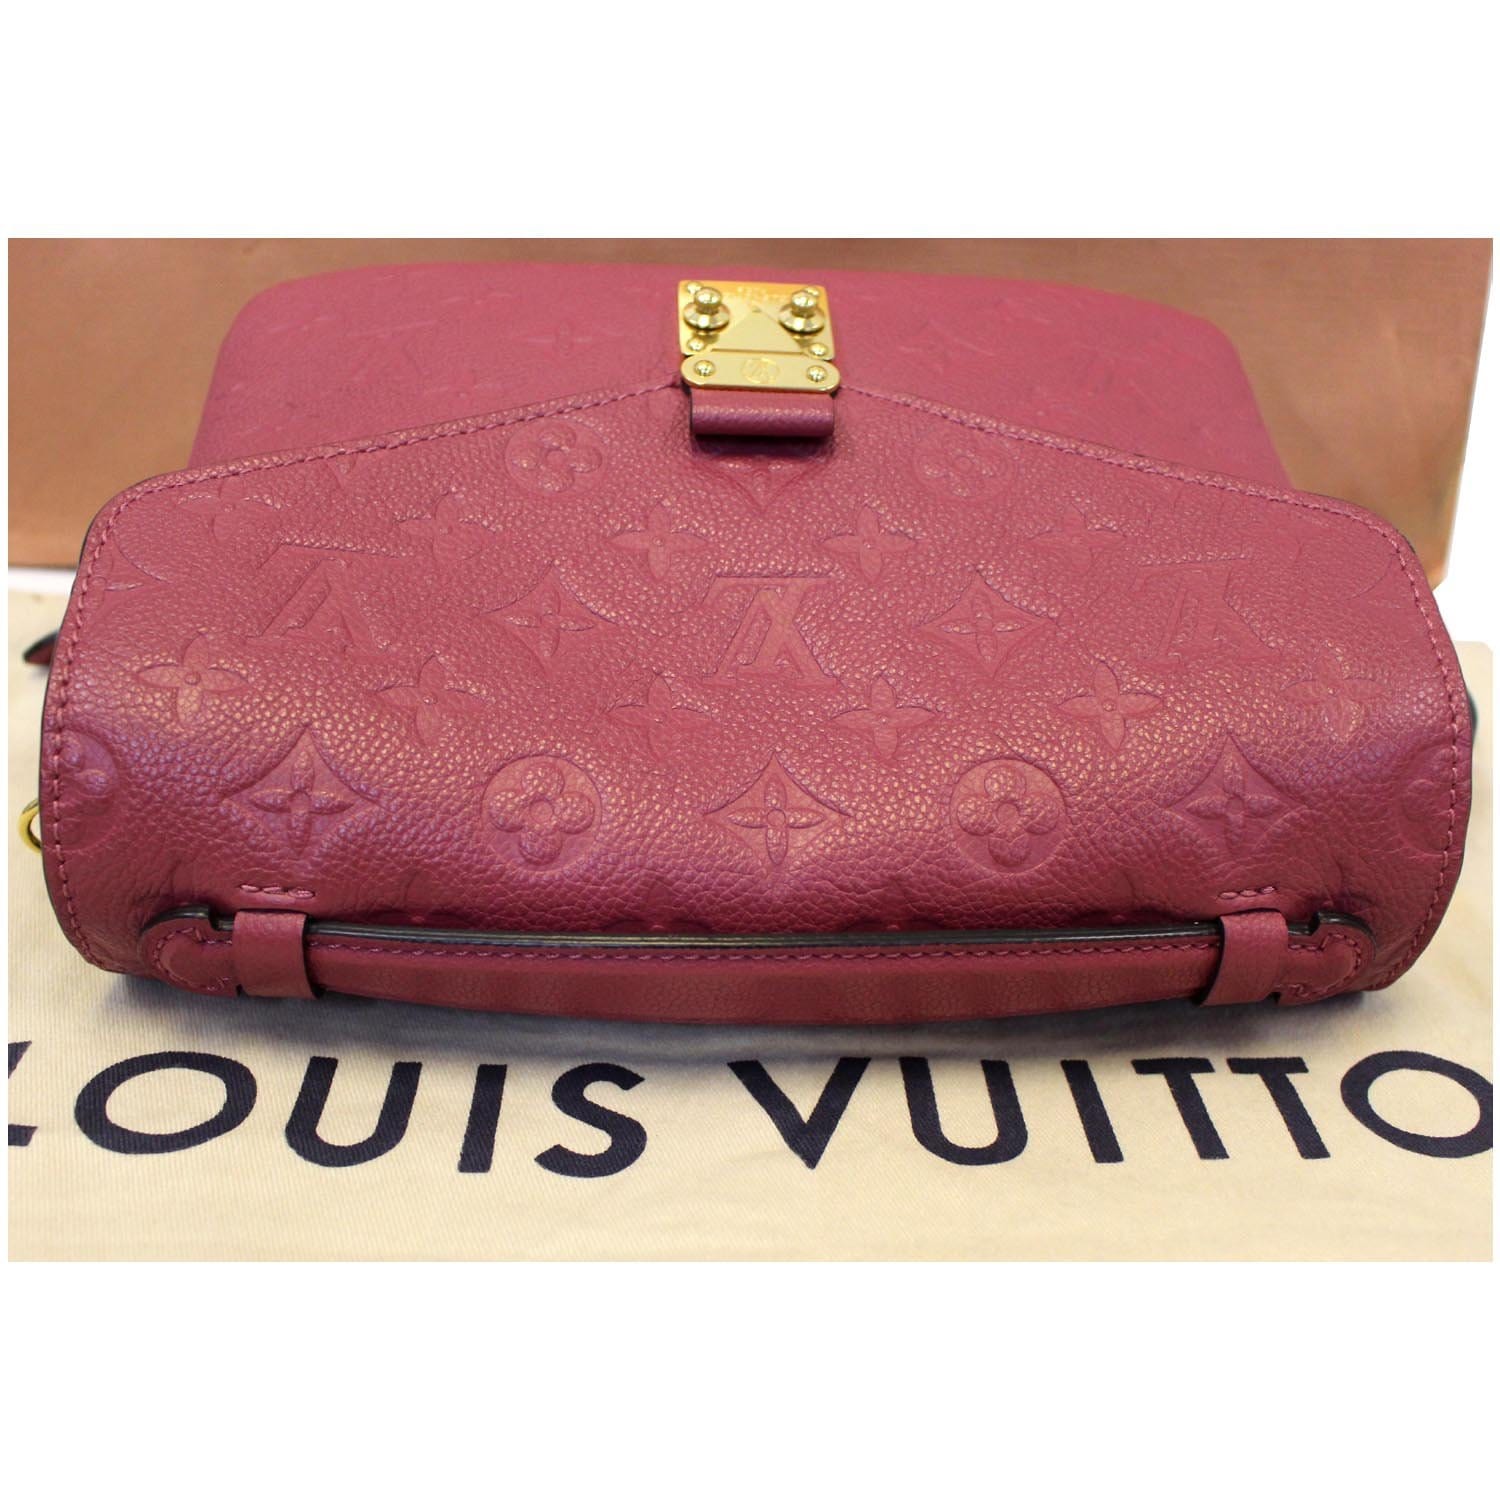 Metis leather crossbody bag Louis Vuitton Pink in Leather - 36067675